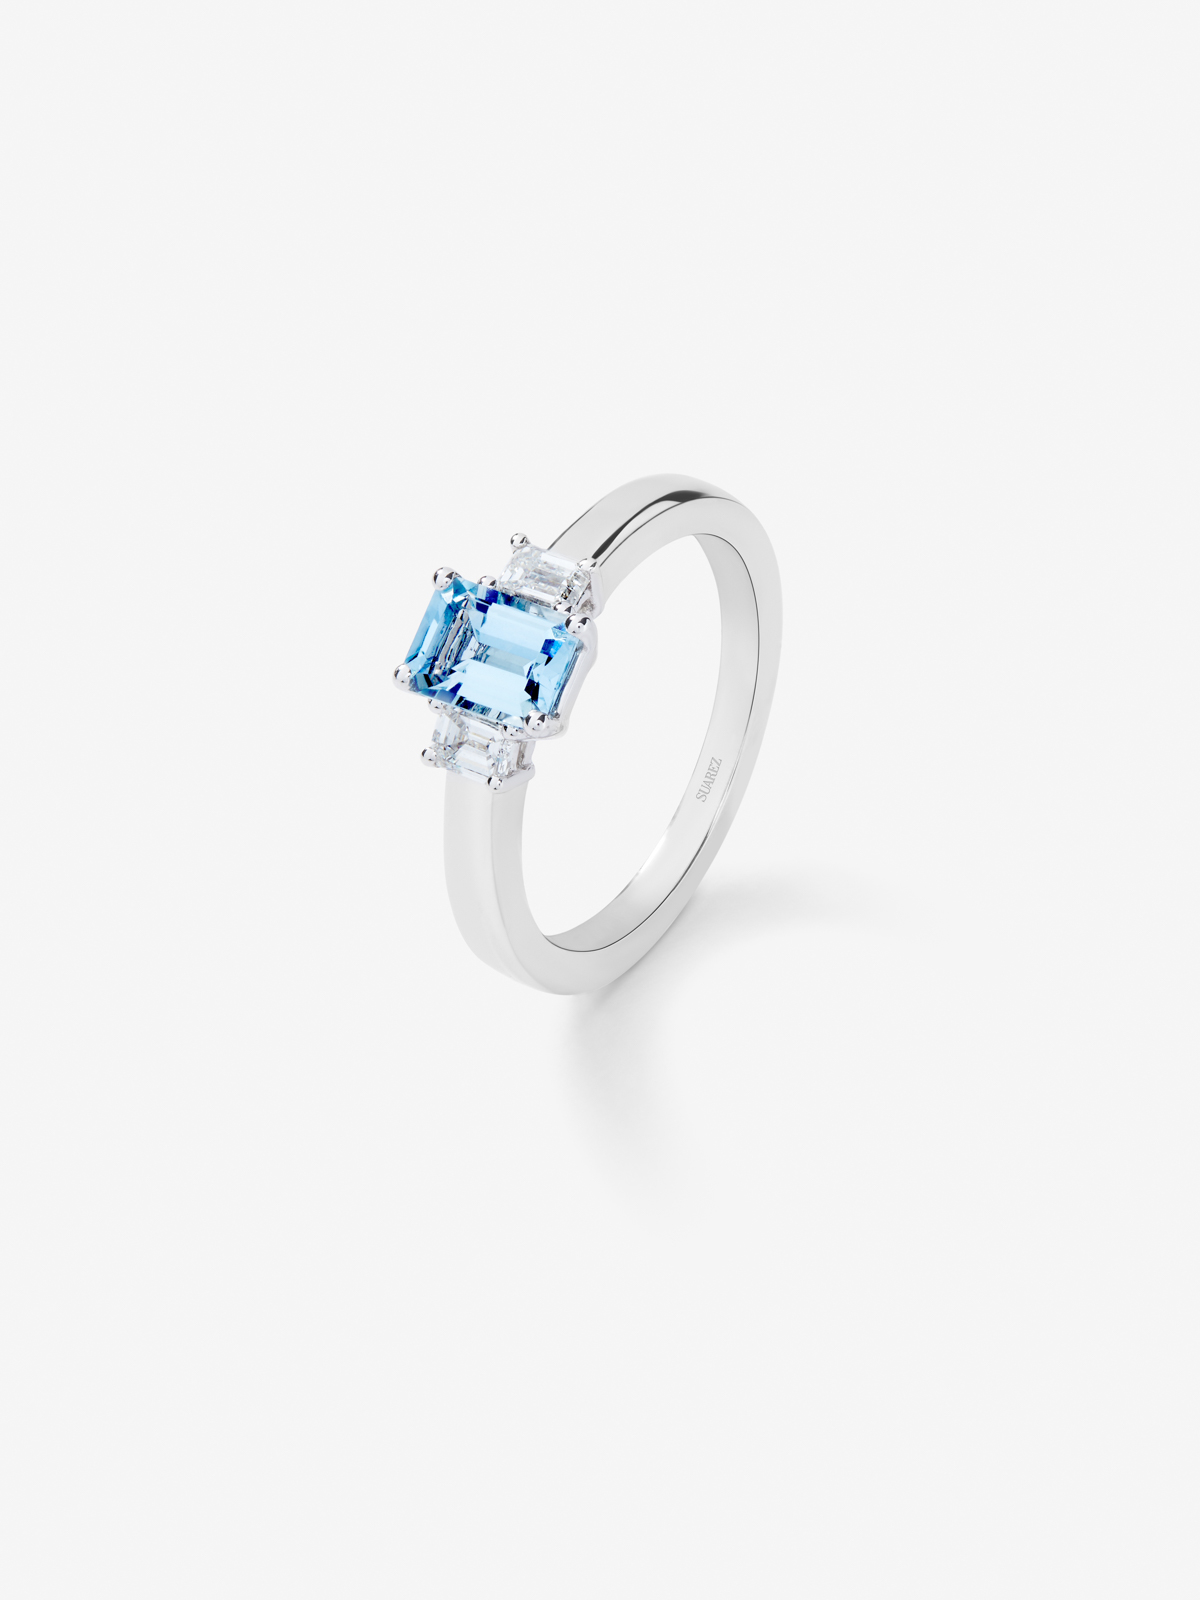 18K white gold trilogy ring with aquamarine and diamond